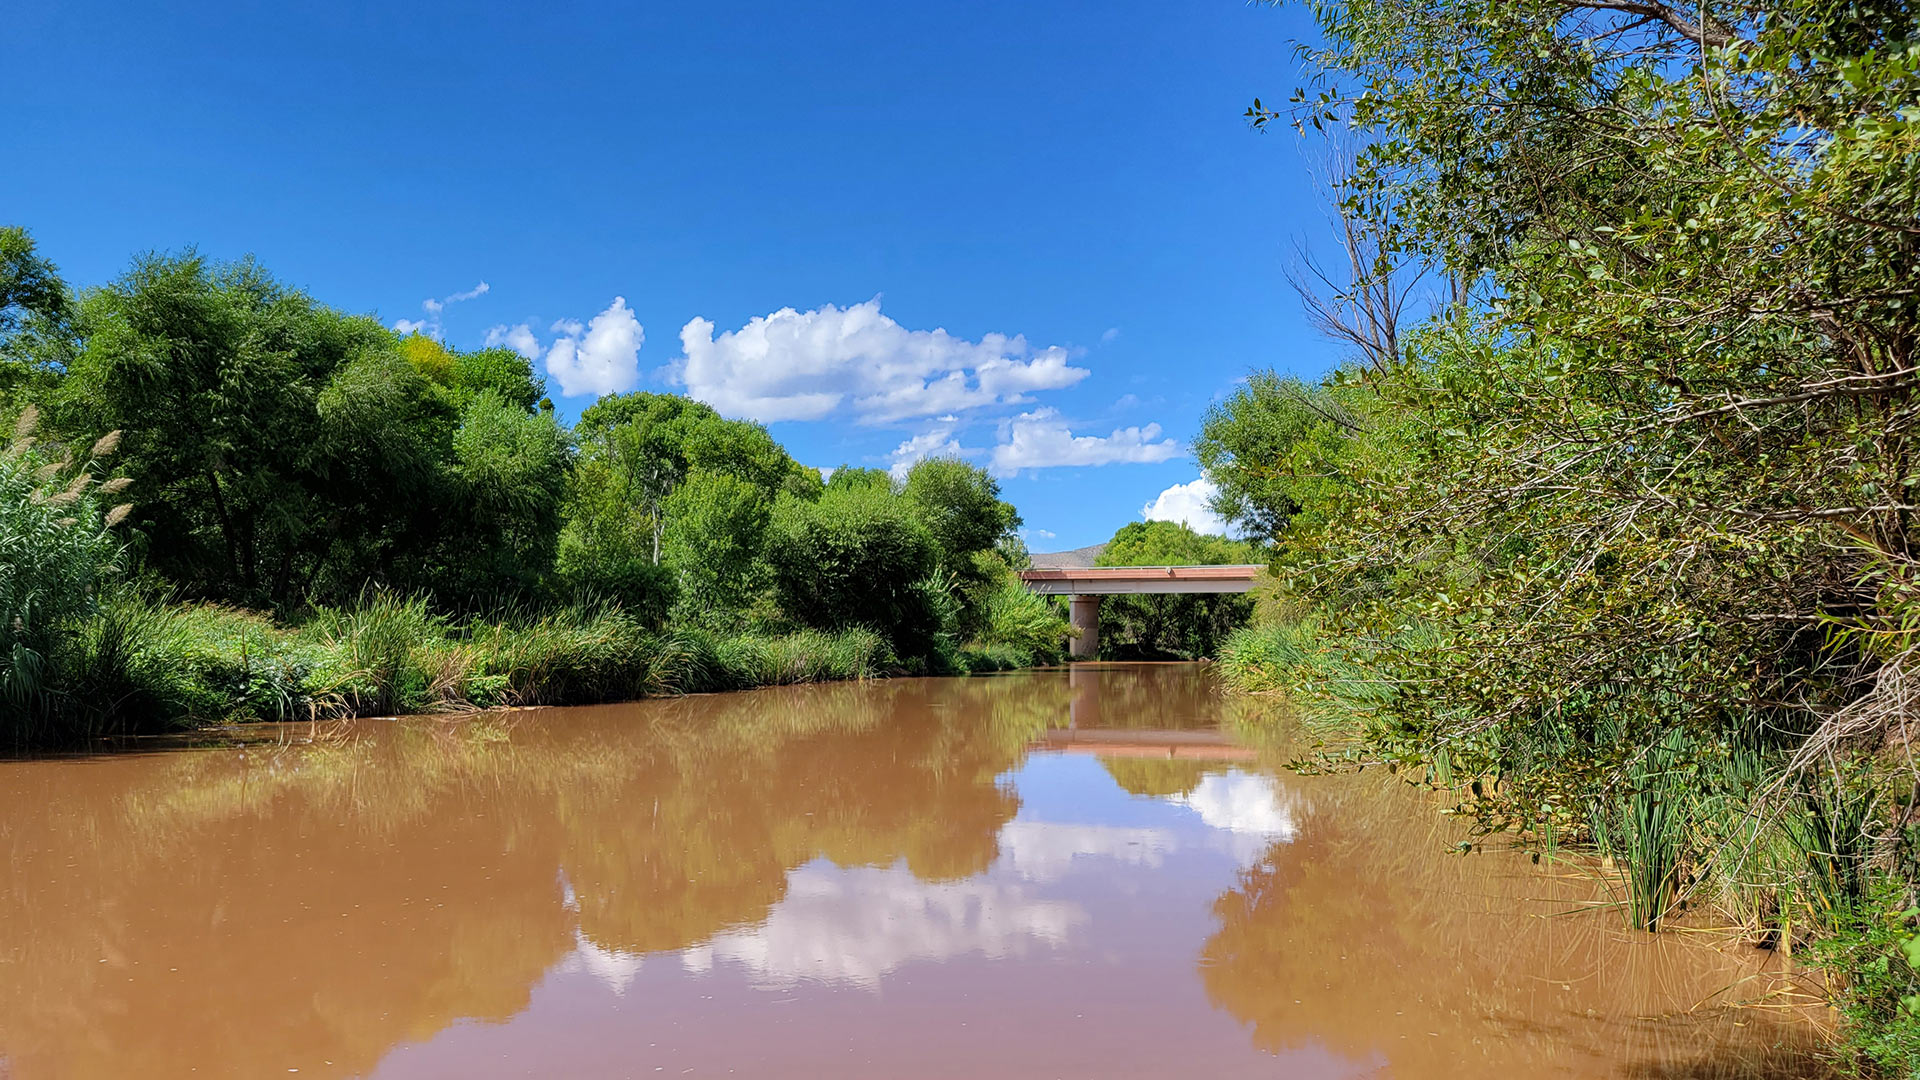 The stretch of the Verde River that goes through Clarkdale ends near the Tuzigoot Road Bridge.